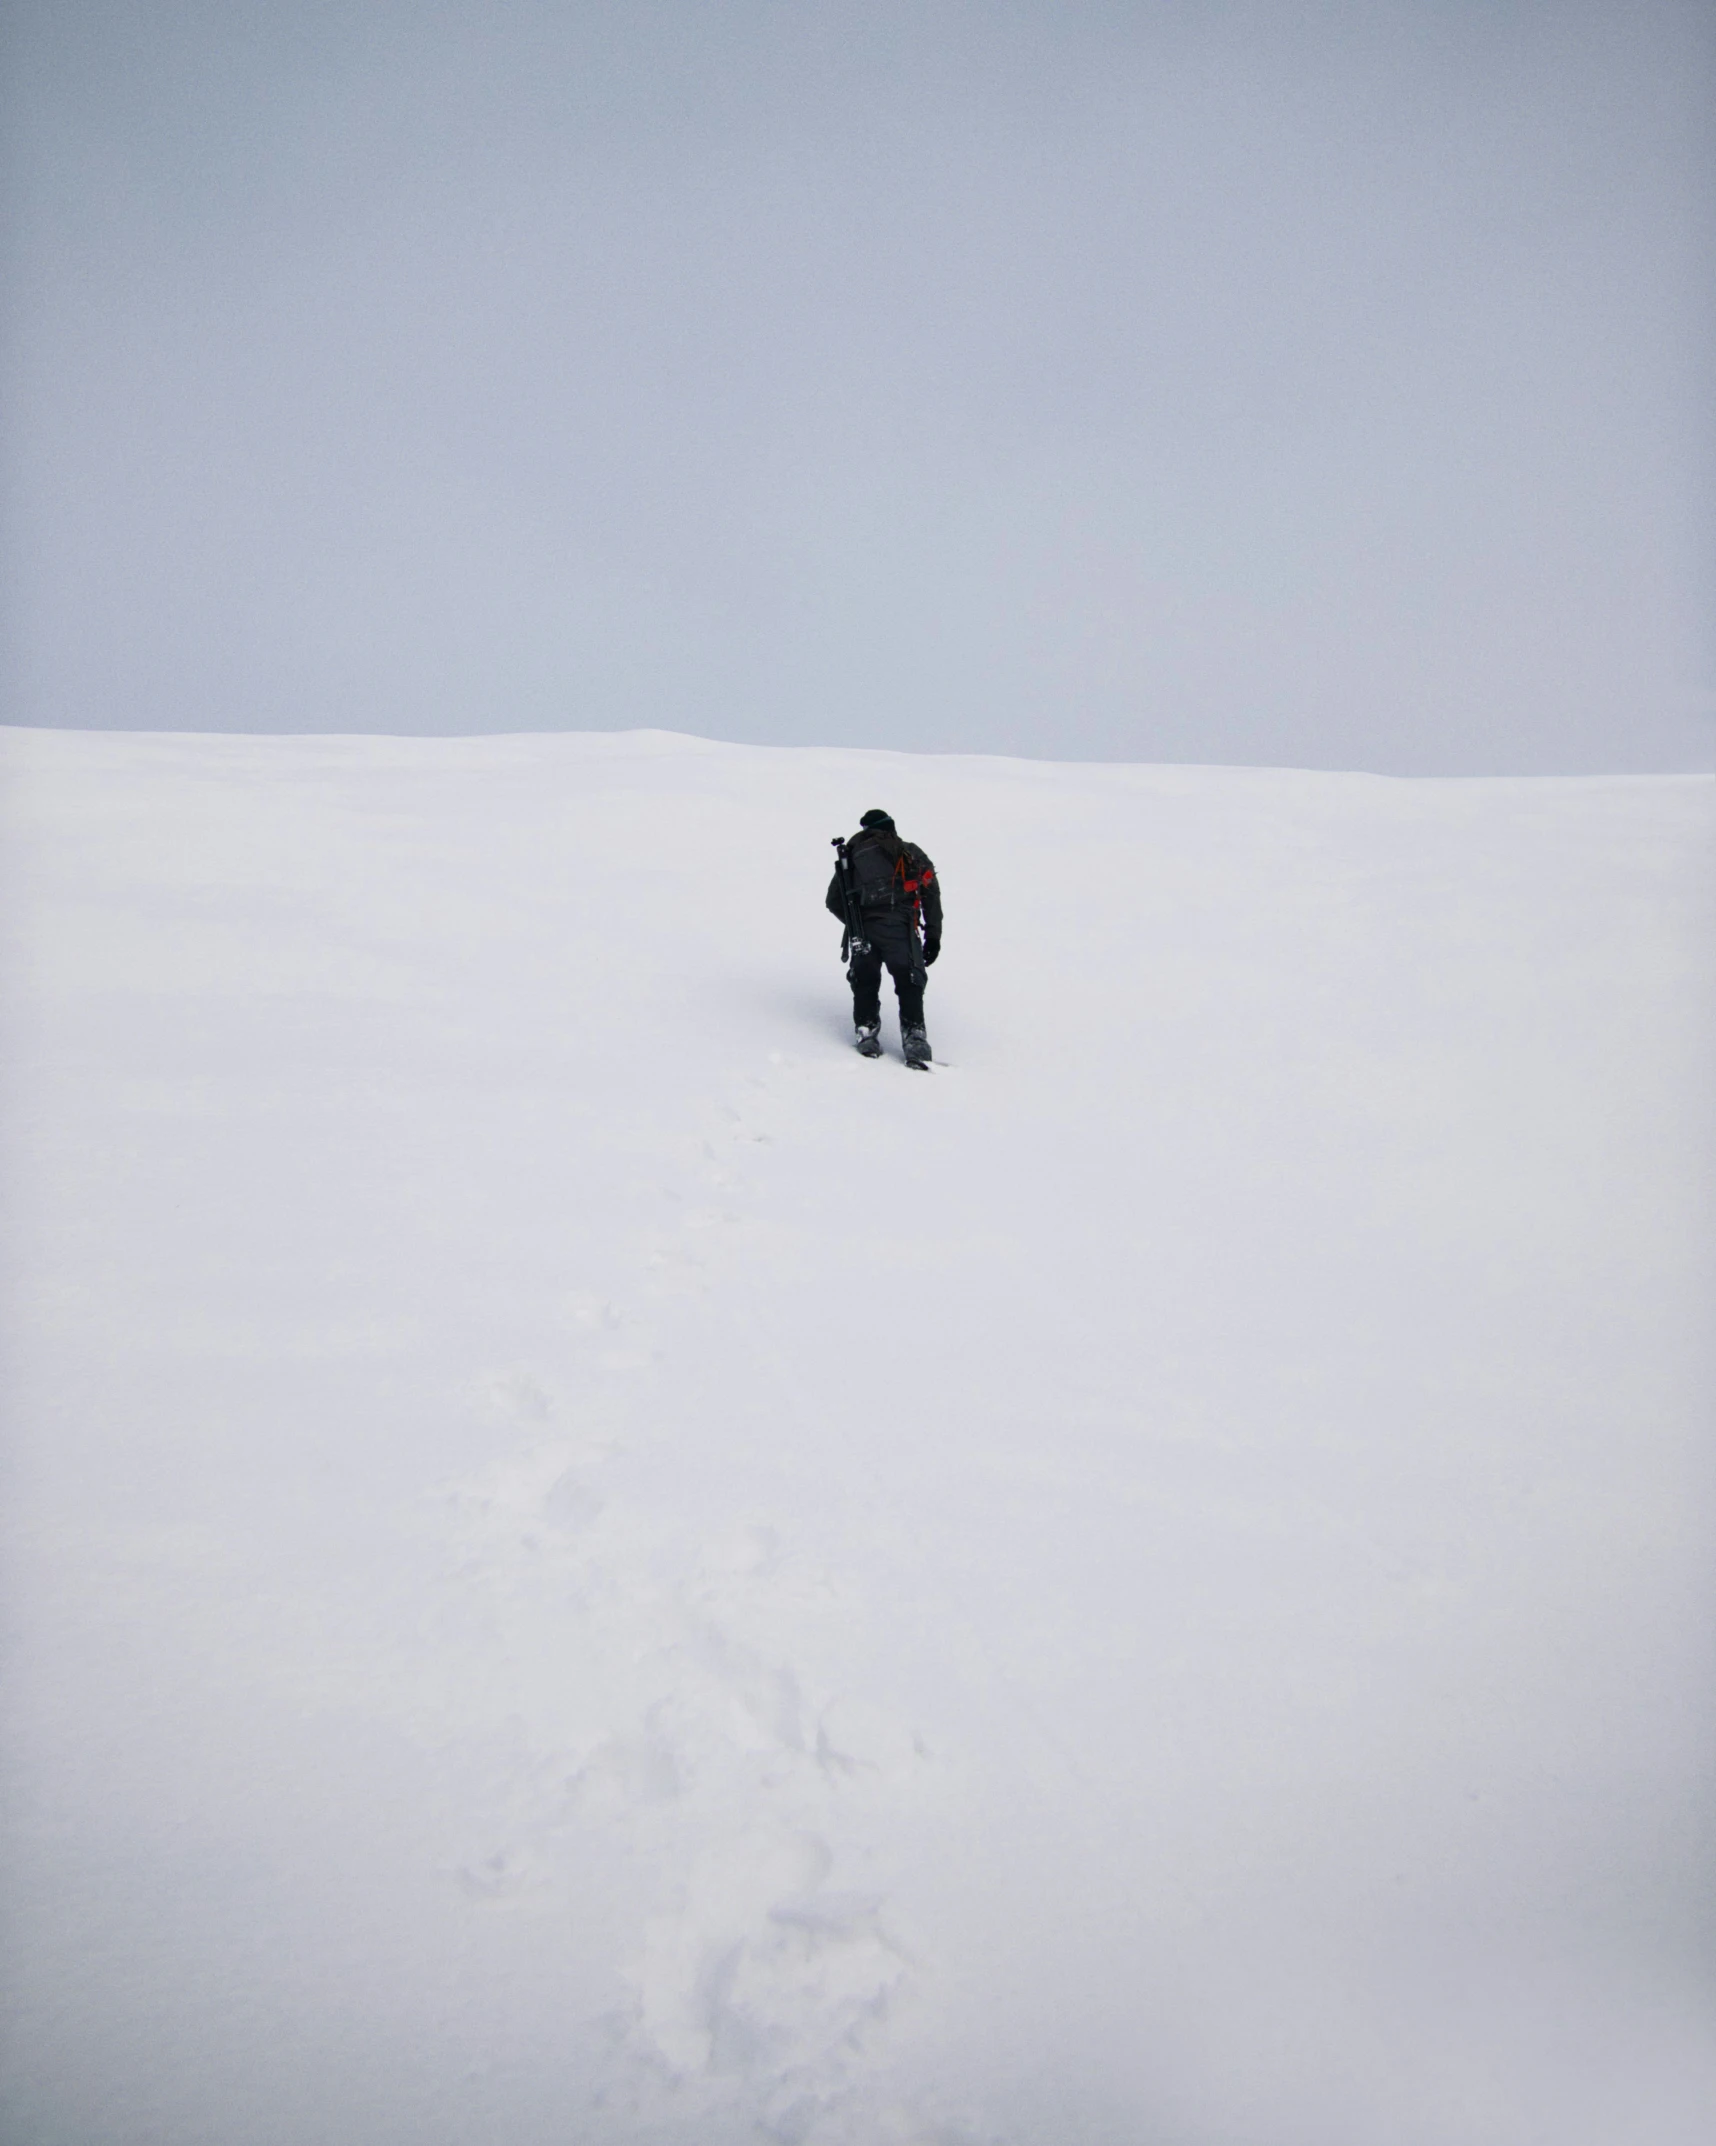 the lone person in black stands on the snowy hill